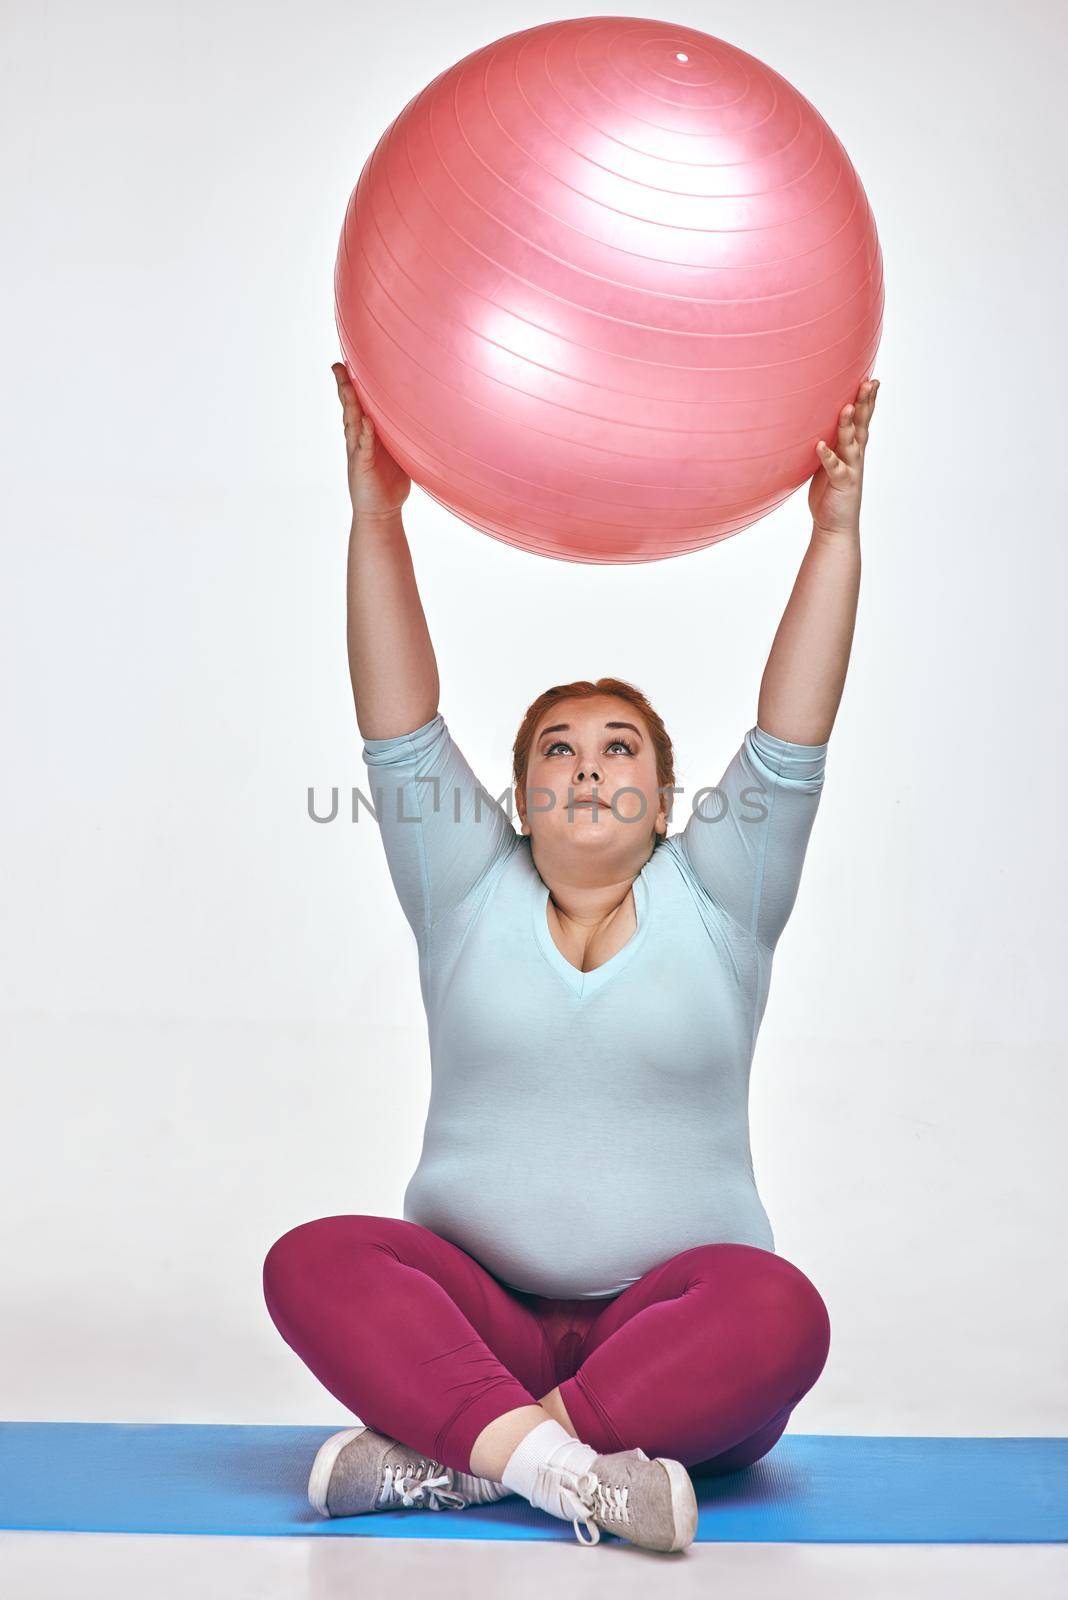 Funny picture of amusing, red haired, chubby woman on white background. Woman is sitting and holding a ball